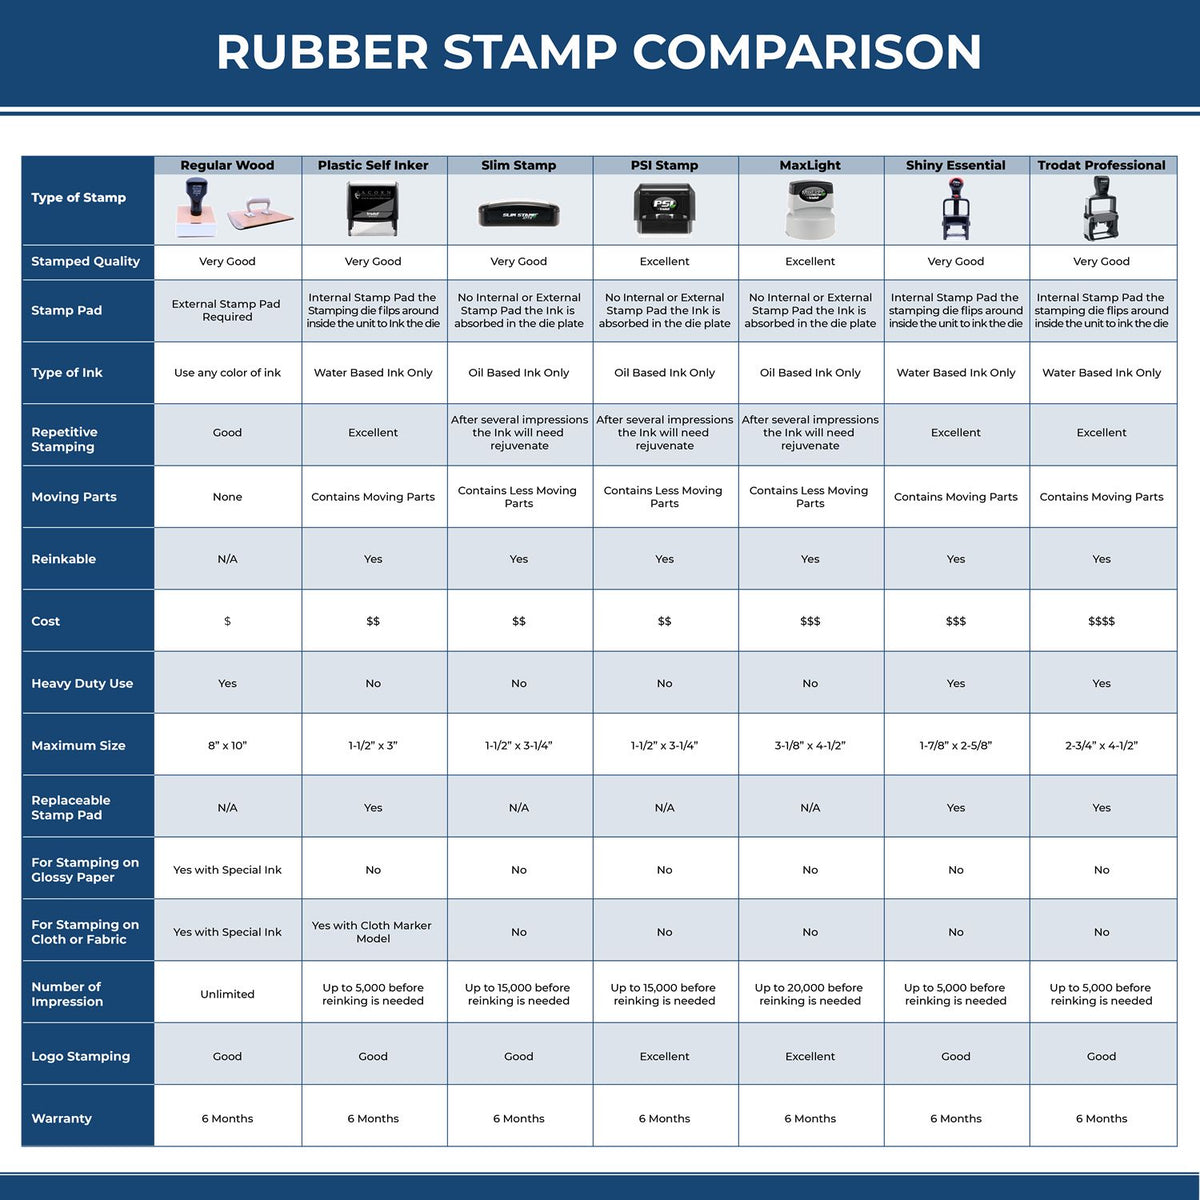 Wrong Bank Rubber Stamp 4292R Rubber Stamp Comparison